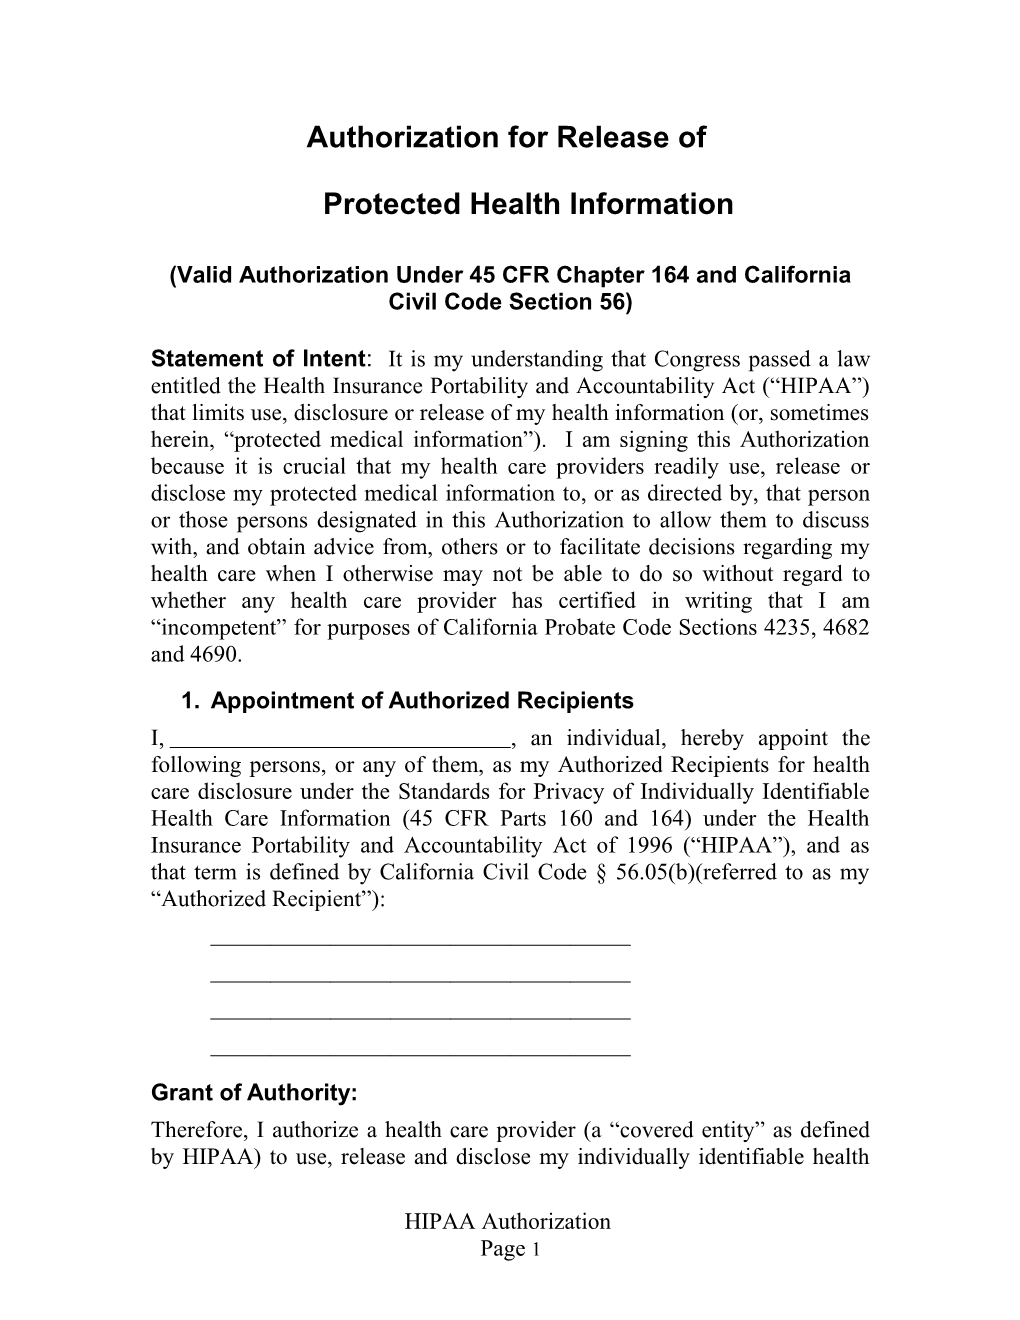 Valid Authorization Under 45 CFR Chapter 164 and California Civil Code Section 56